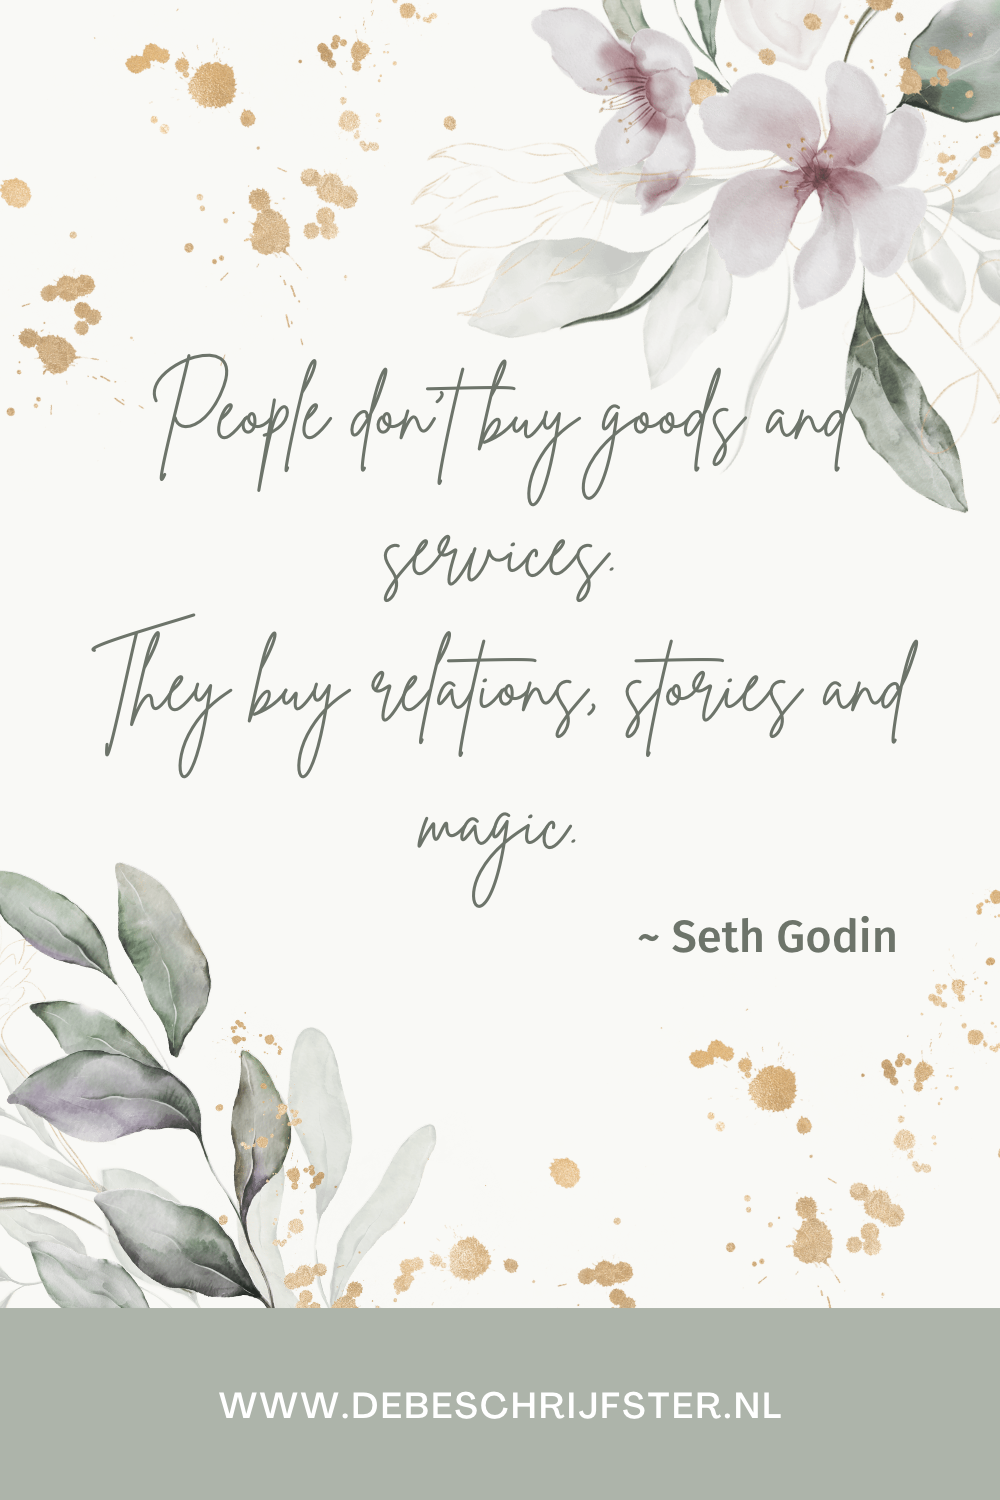 People do not buy goods and services. They buy relations, stories and magic. Seth Godin